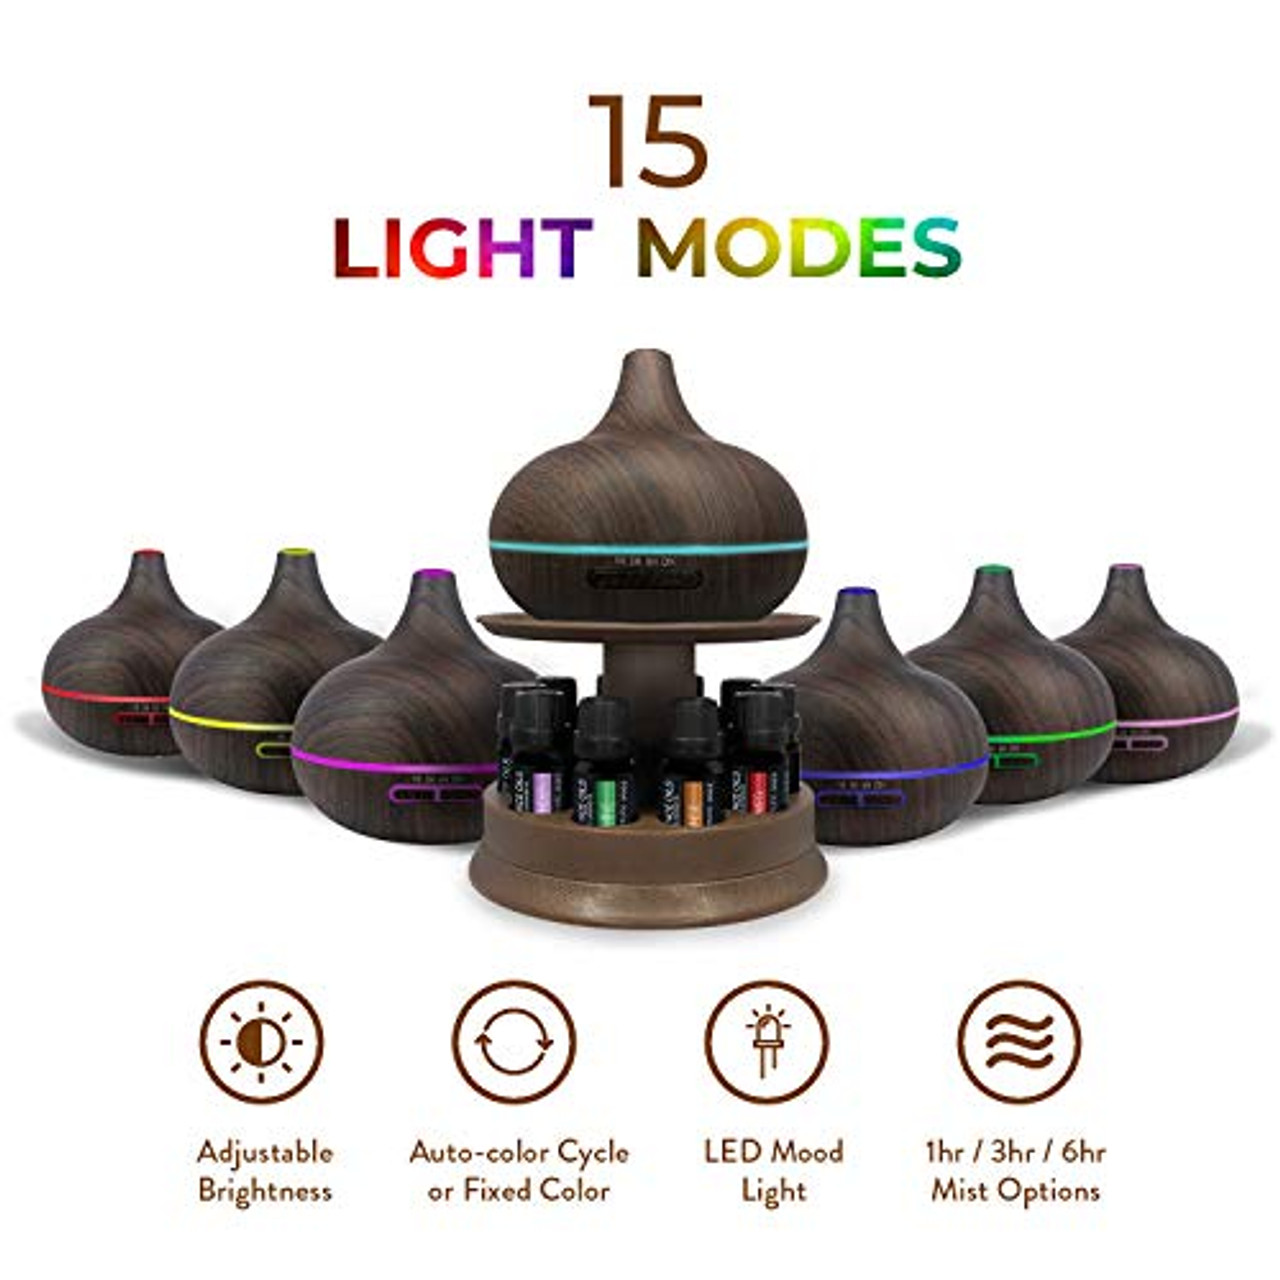  Ultimate Aromatherapy Diffuser & Essential Oil Set - Ultrasonic  Diffuser & Top 10 Essential Oils - 300ml Diffuser w/ 4 Timer & 7 Ambient  Light Settings - Therapeutic Essential Oils 